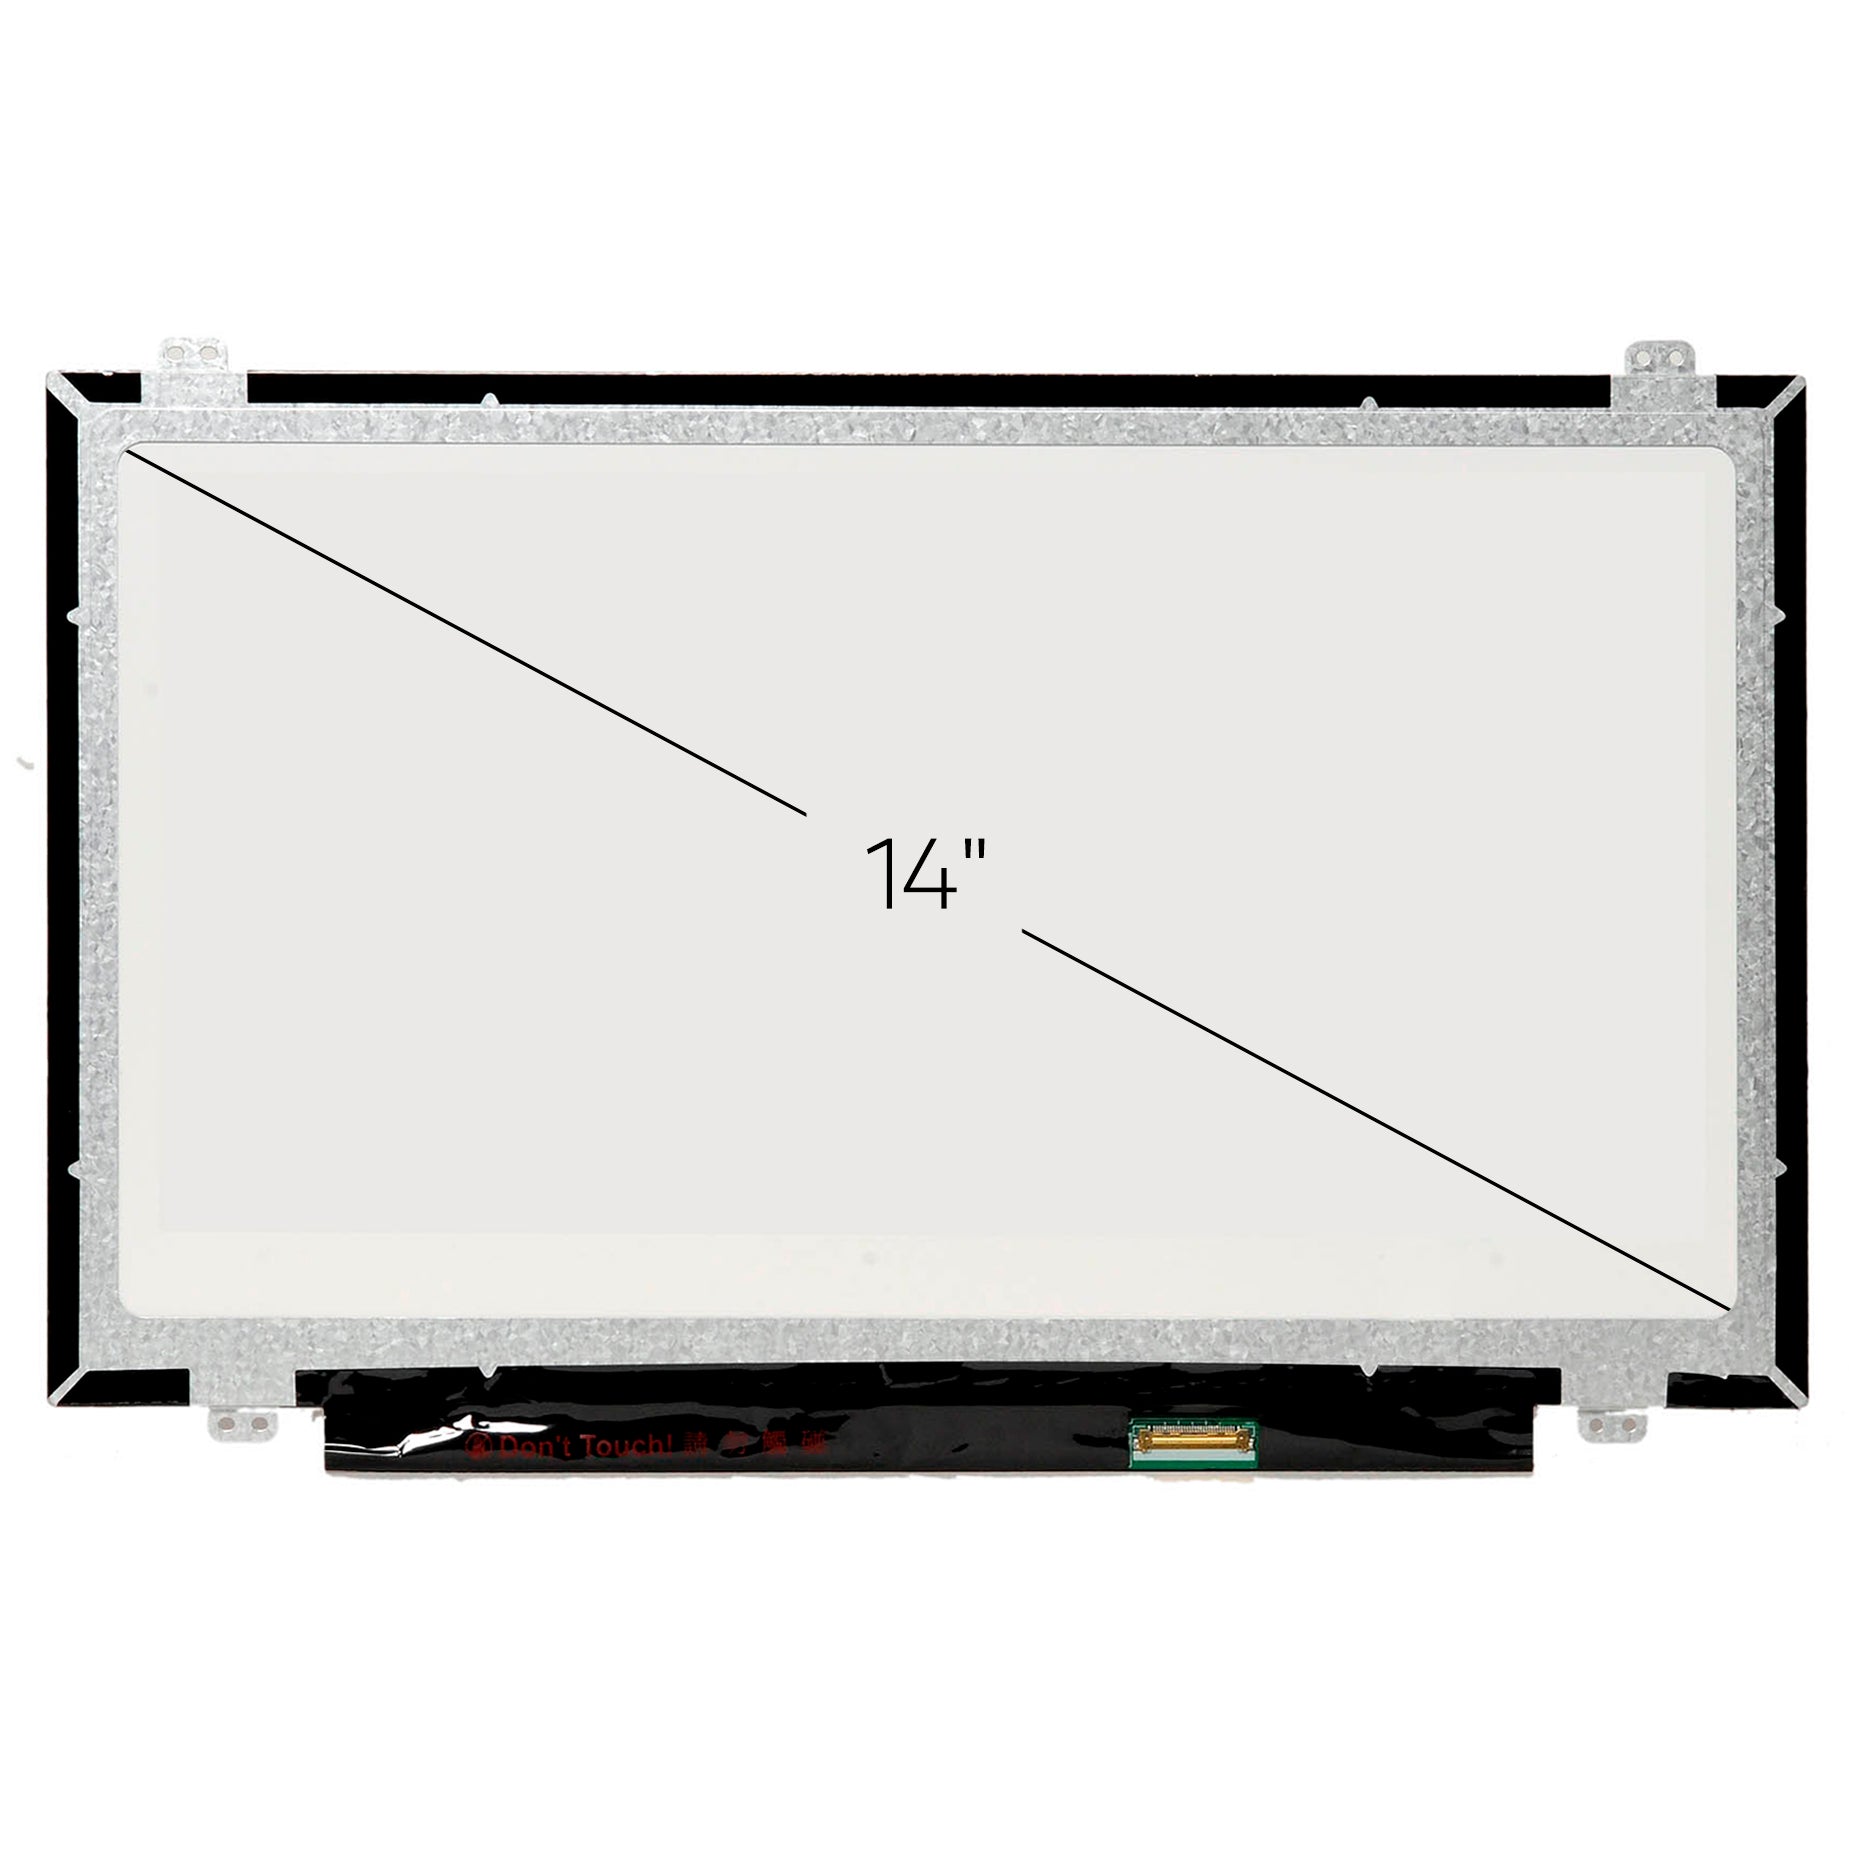 Screen Replacement for HP P/N 747751-001 HD 1366x768 Glossy LCD LED Display